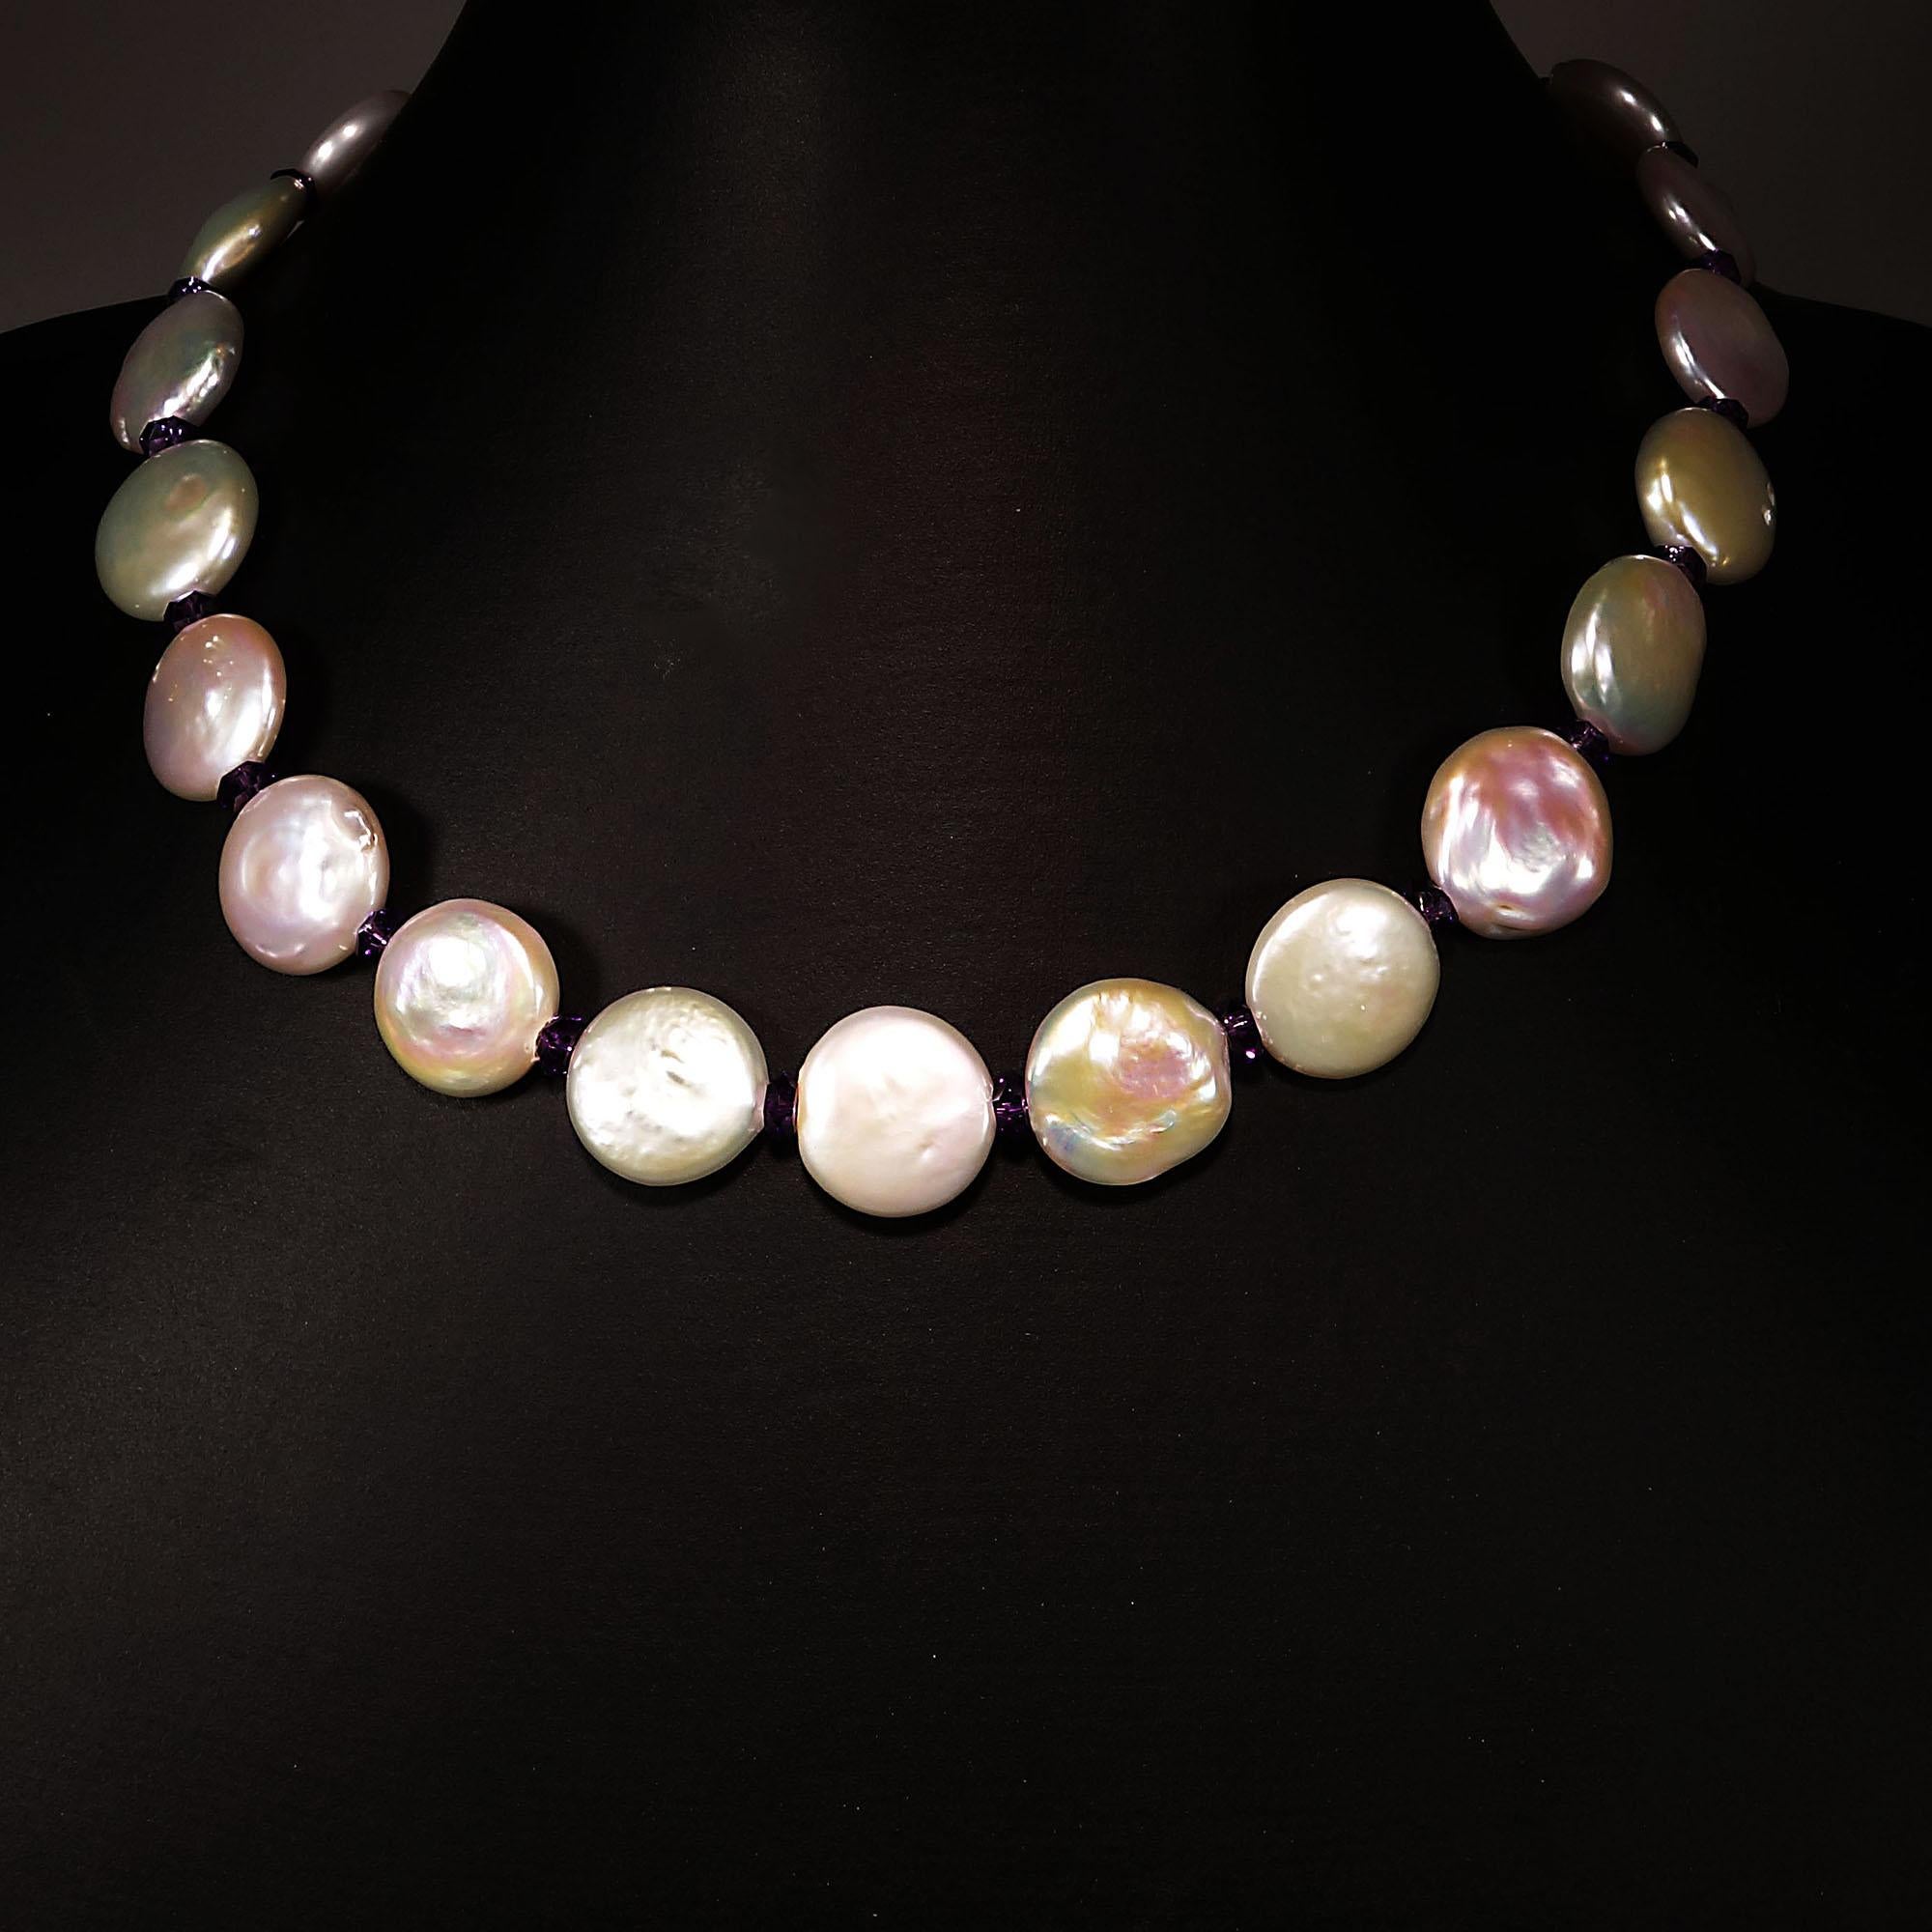 Artisan AJD Glowing White Coin Pearl Choker Necklace  June Birthstone